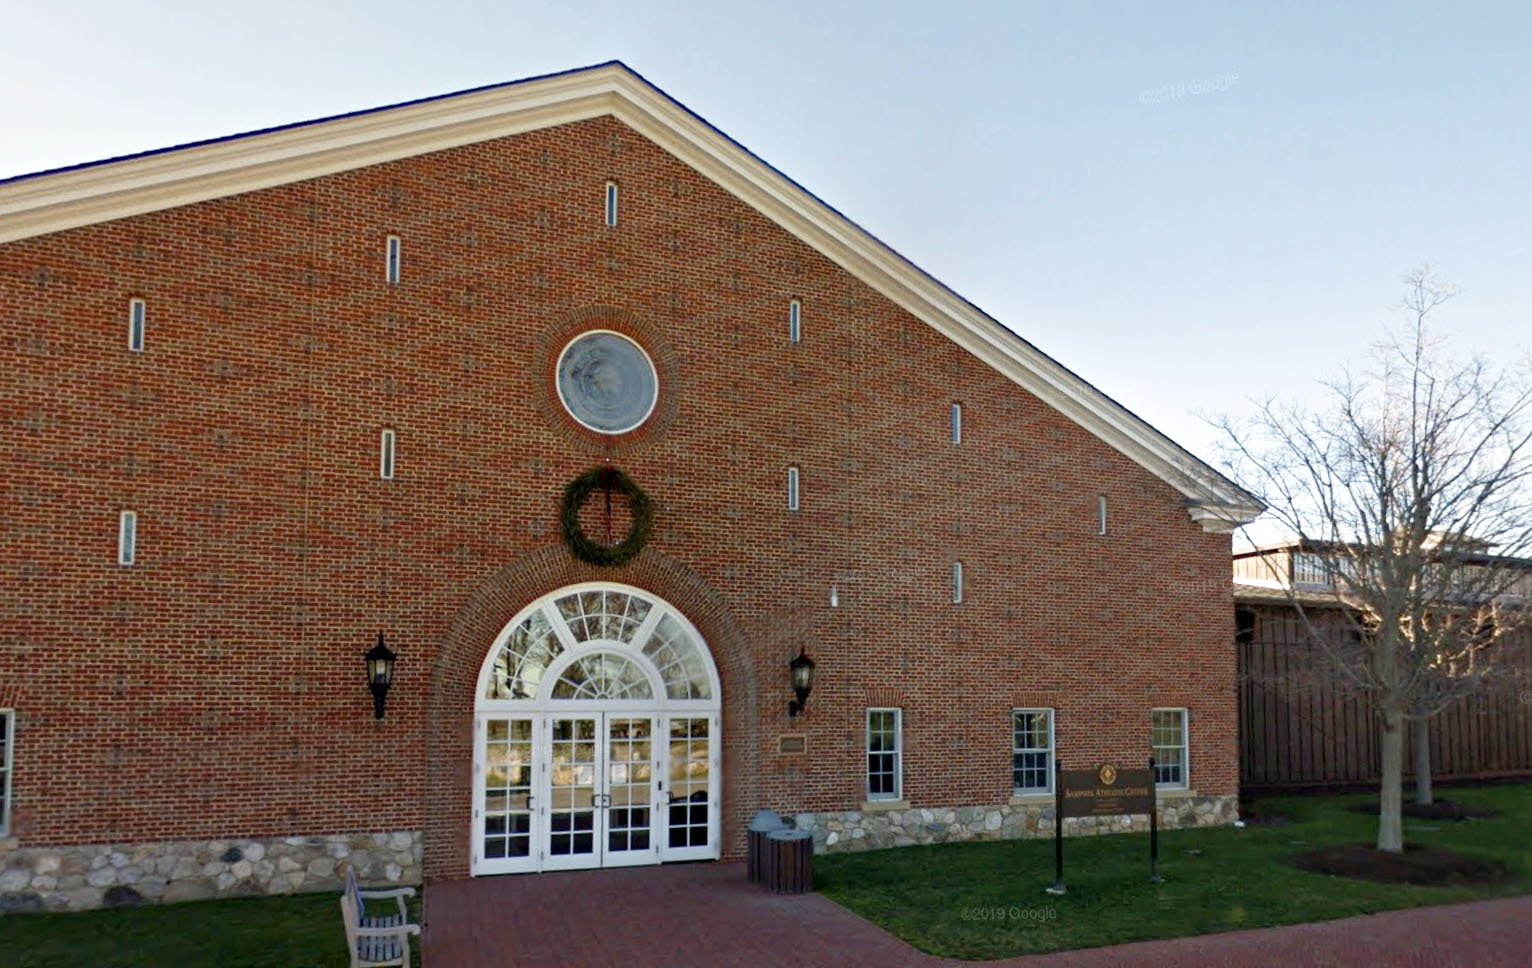 PHOTO: In this screen grab taken from Google Maps Street View, the Sampson Athletic Center at Brunswick School is shown.